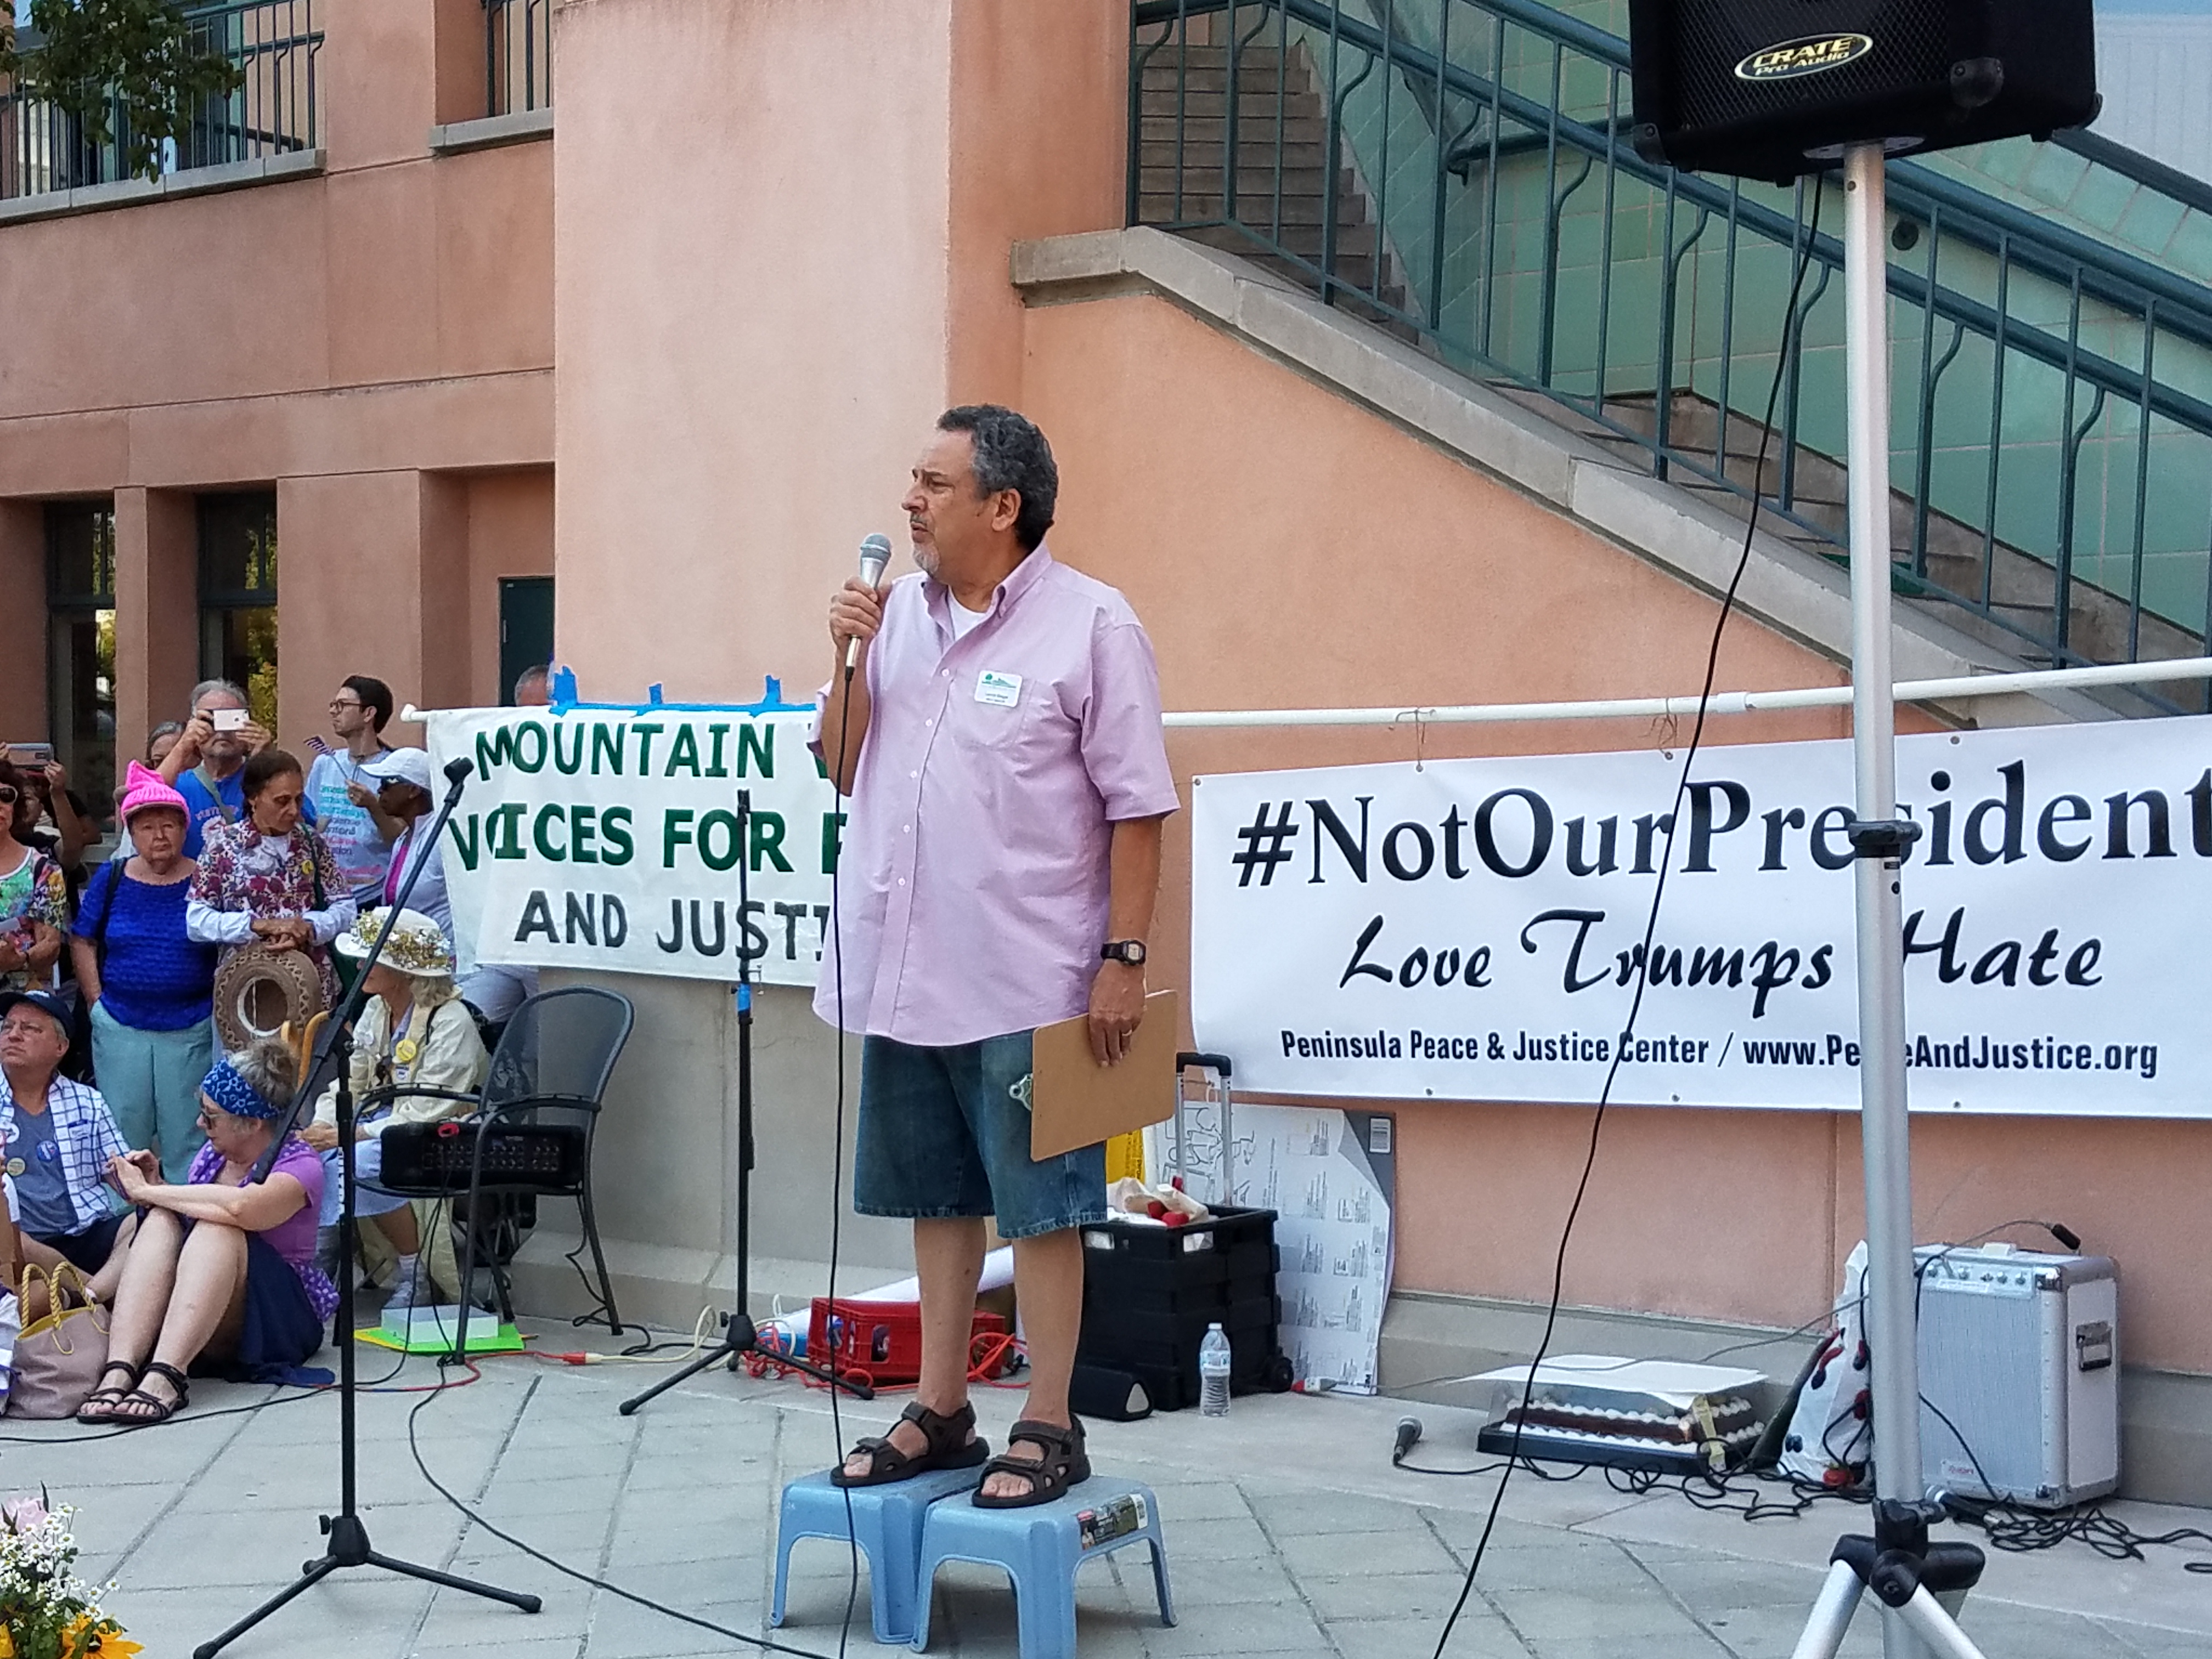 Lenny speaking at unity demonstration, Mountain View city hall, summer, 2017